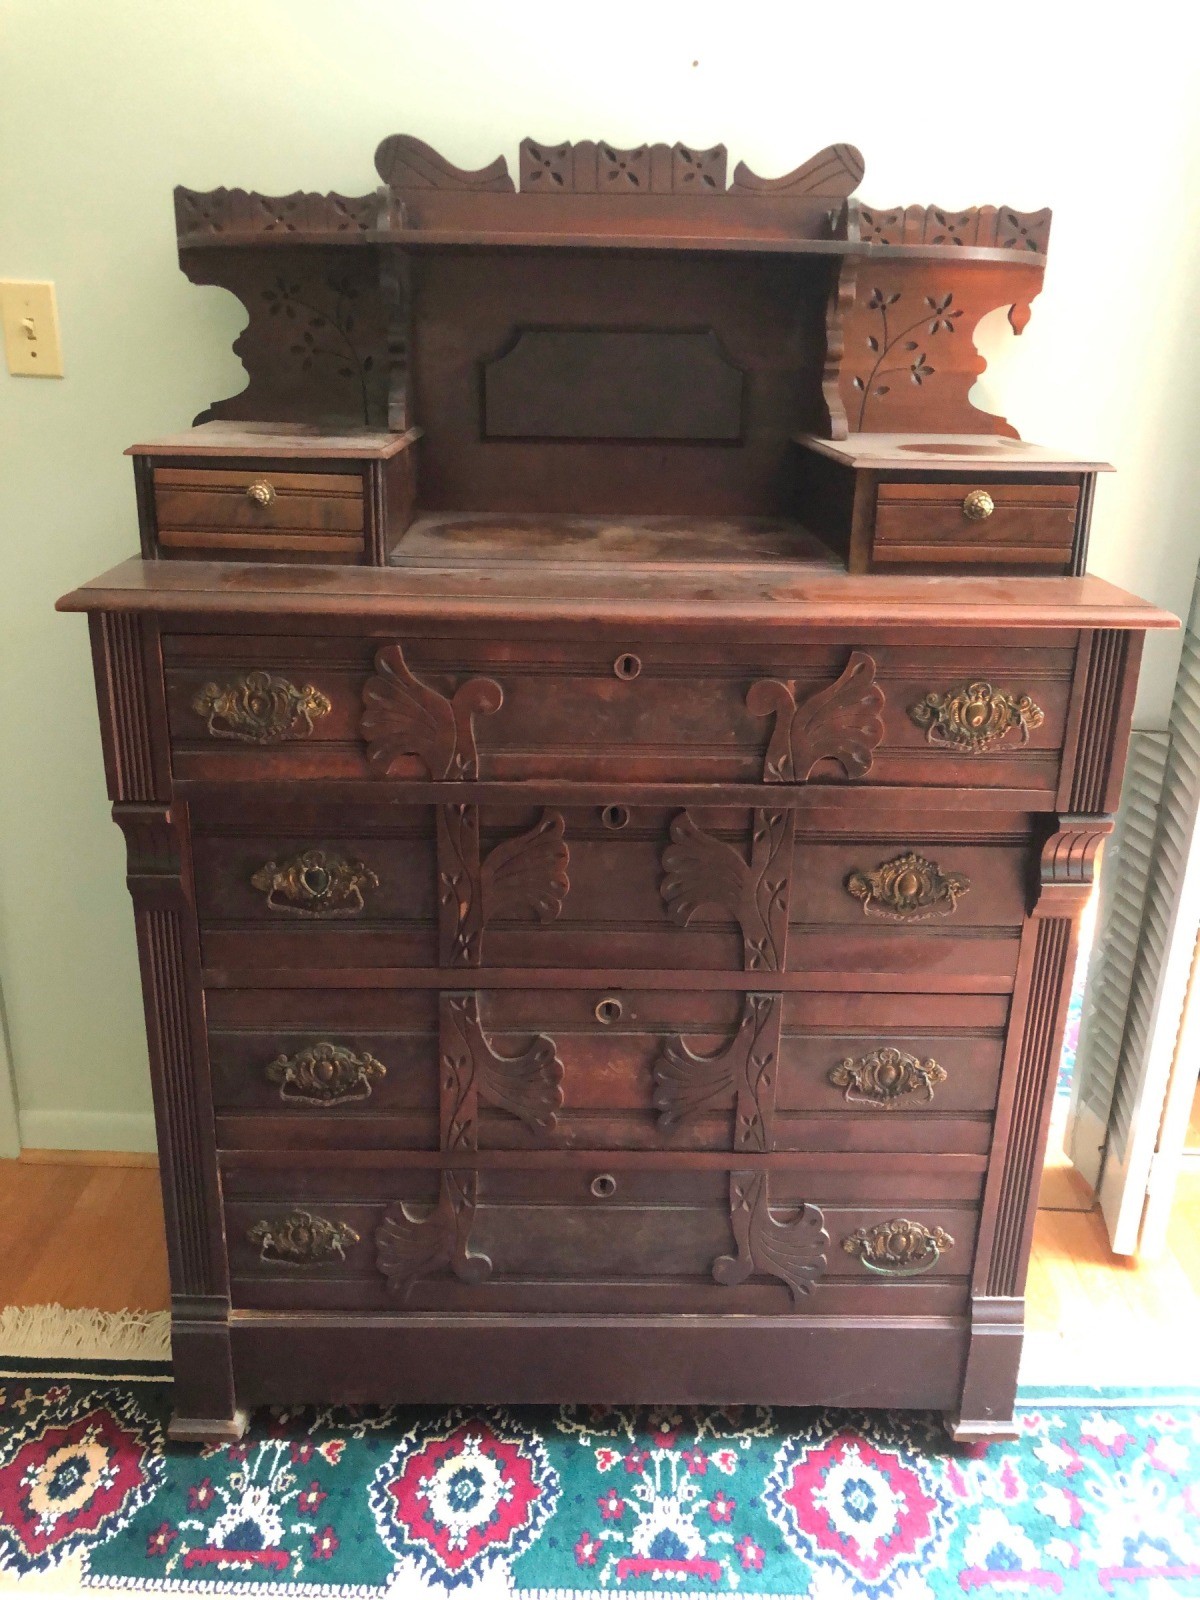 Age And Value Of An Antique Dresser, Pictures Of Old Antique Dressers